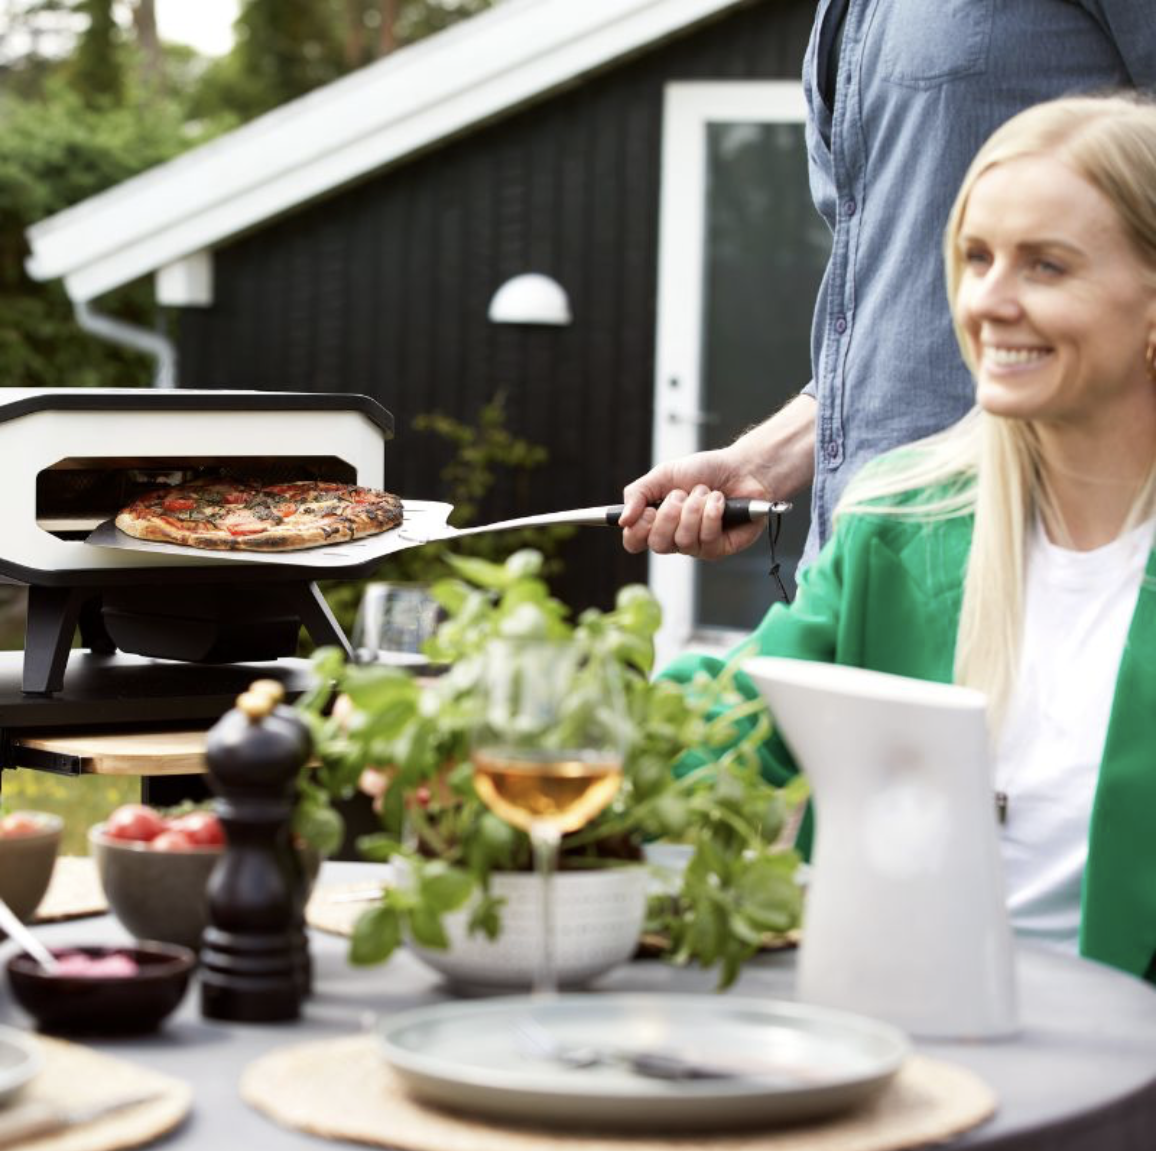 Why is a gas pizza oven best?